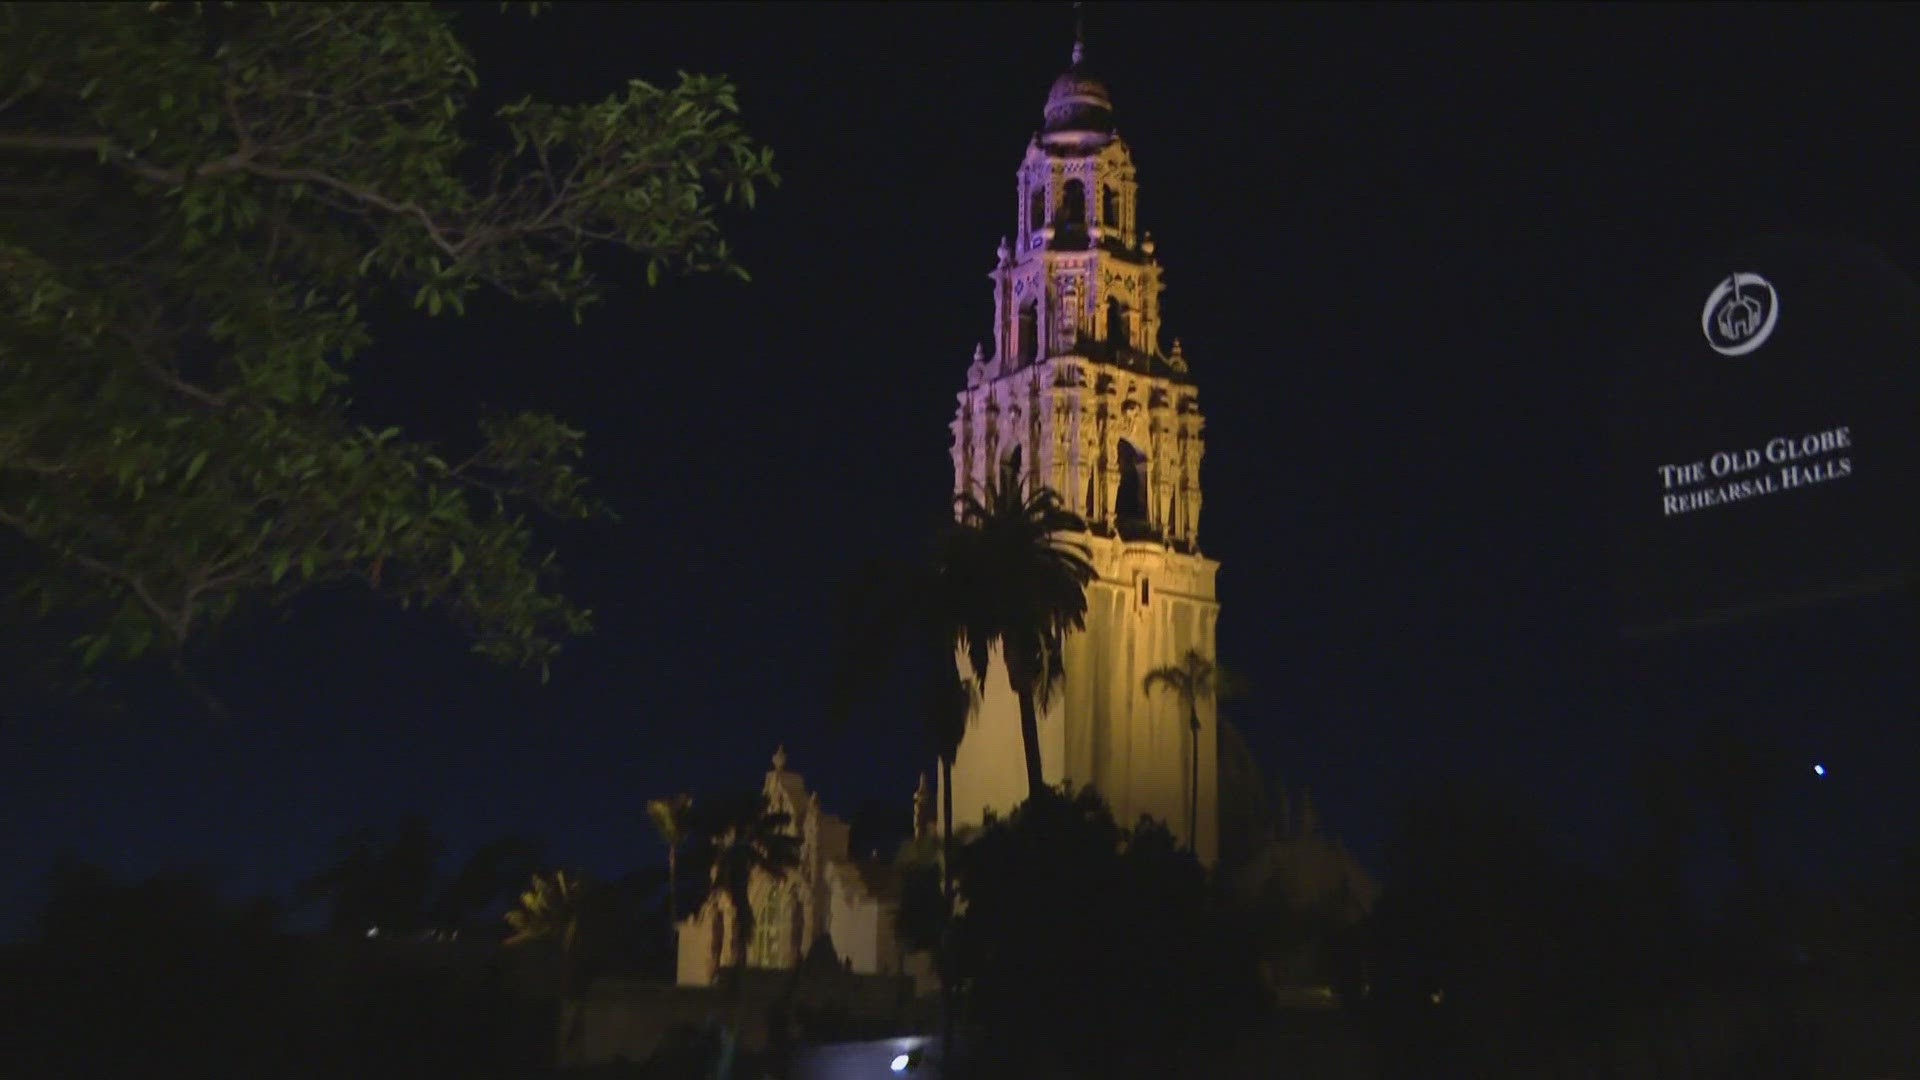 Many people said the poor lighting at Alcazar Garden is a safety concern.